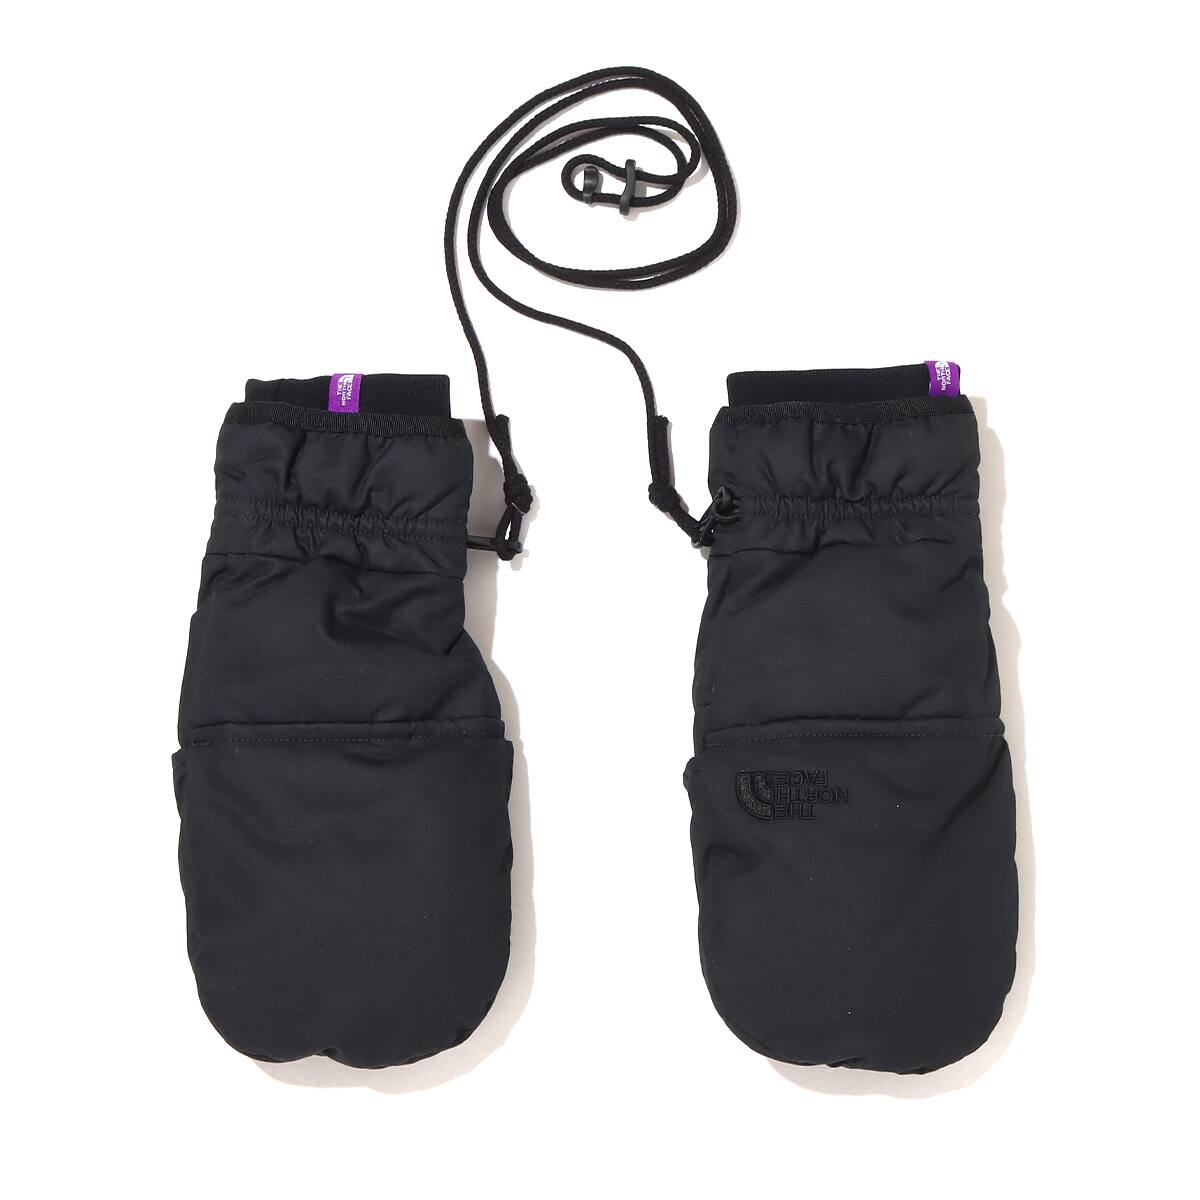 THE NORTH FACE PURPLE LABEL Lightweight Twill Mountain Down Glove 